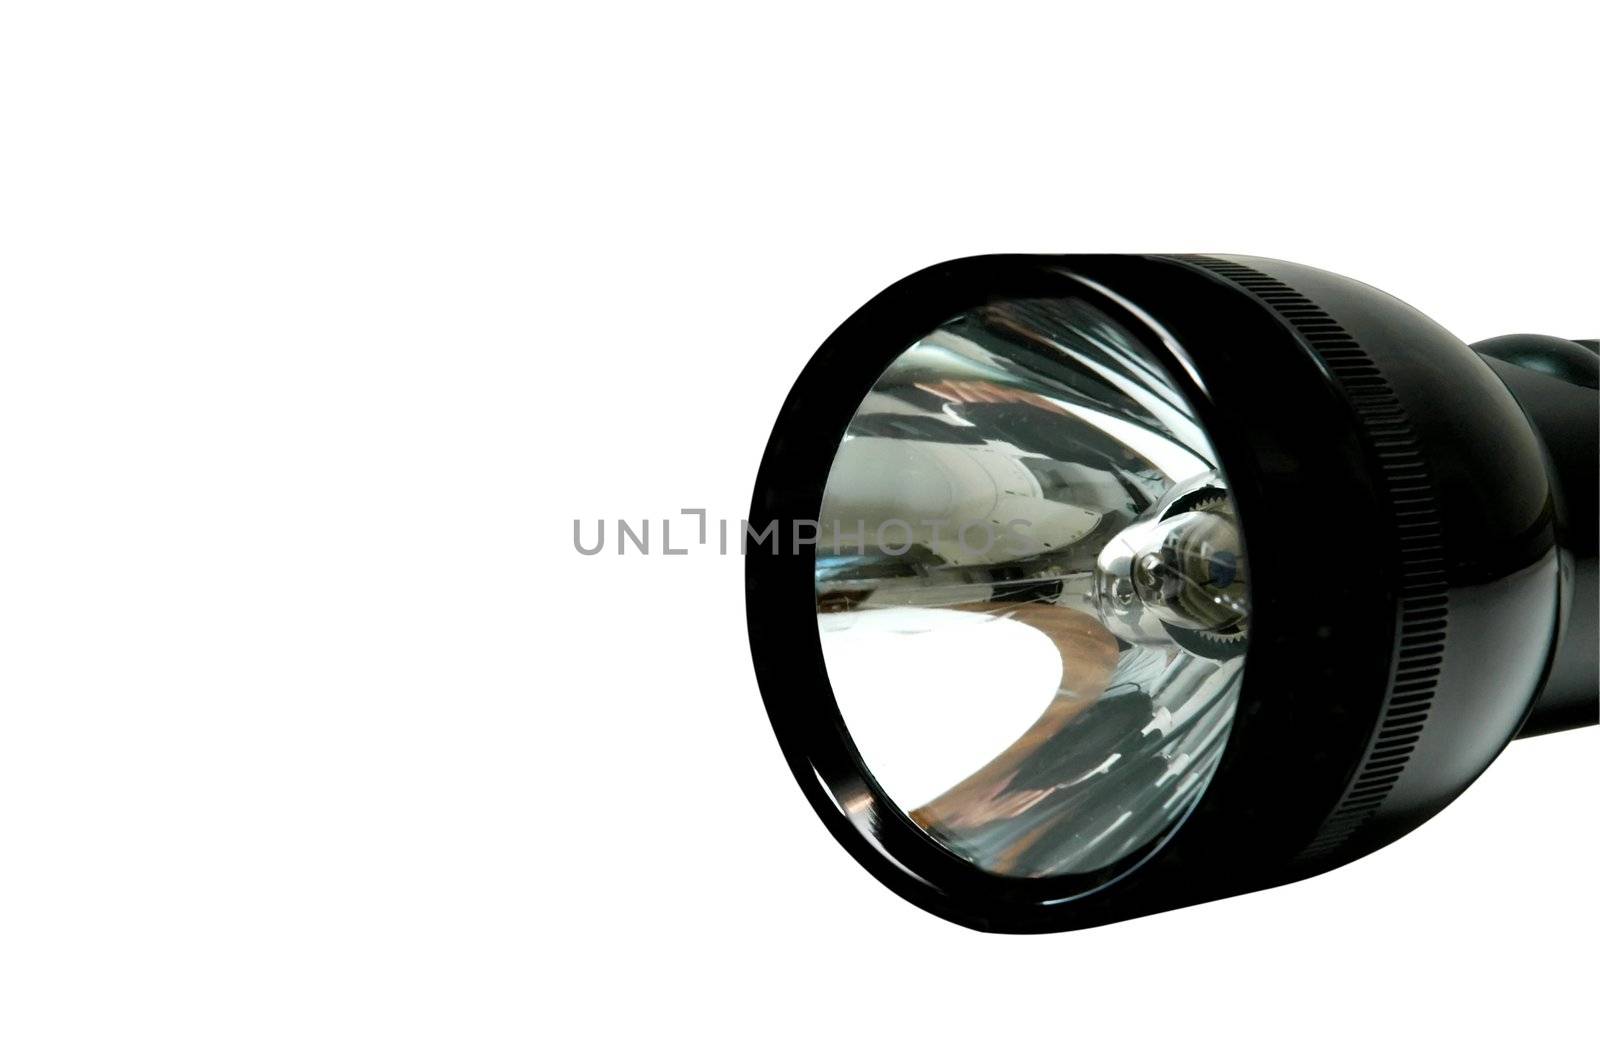 Aluminum flashlight with clipping path.